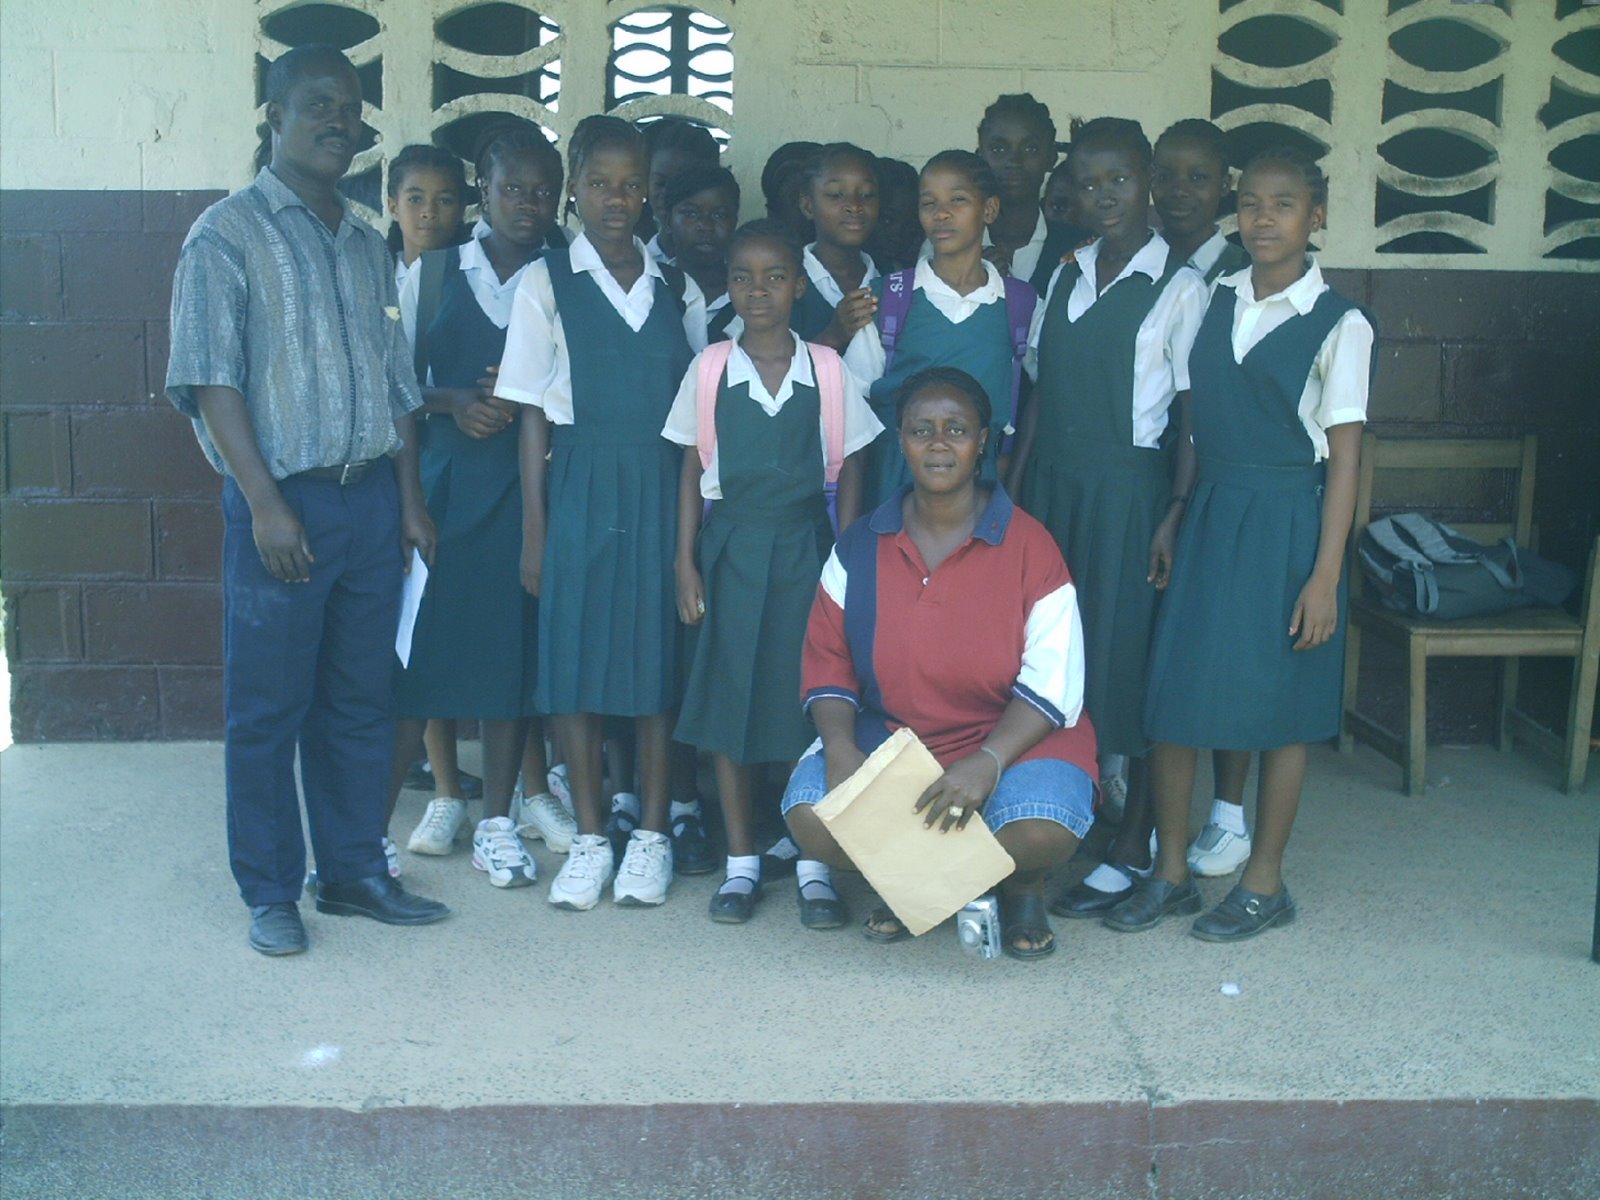 [Emily+with+principal+and+members+of+the+sixth+grade+class+of+St.+Martin.JPG]